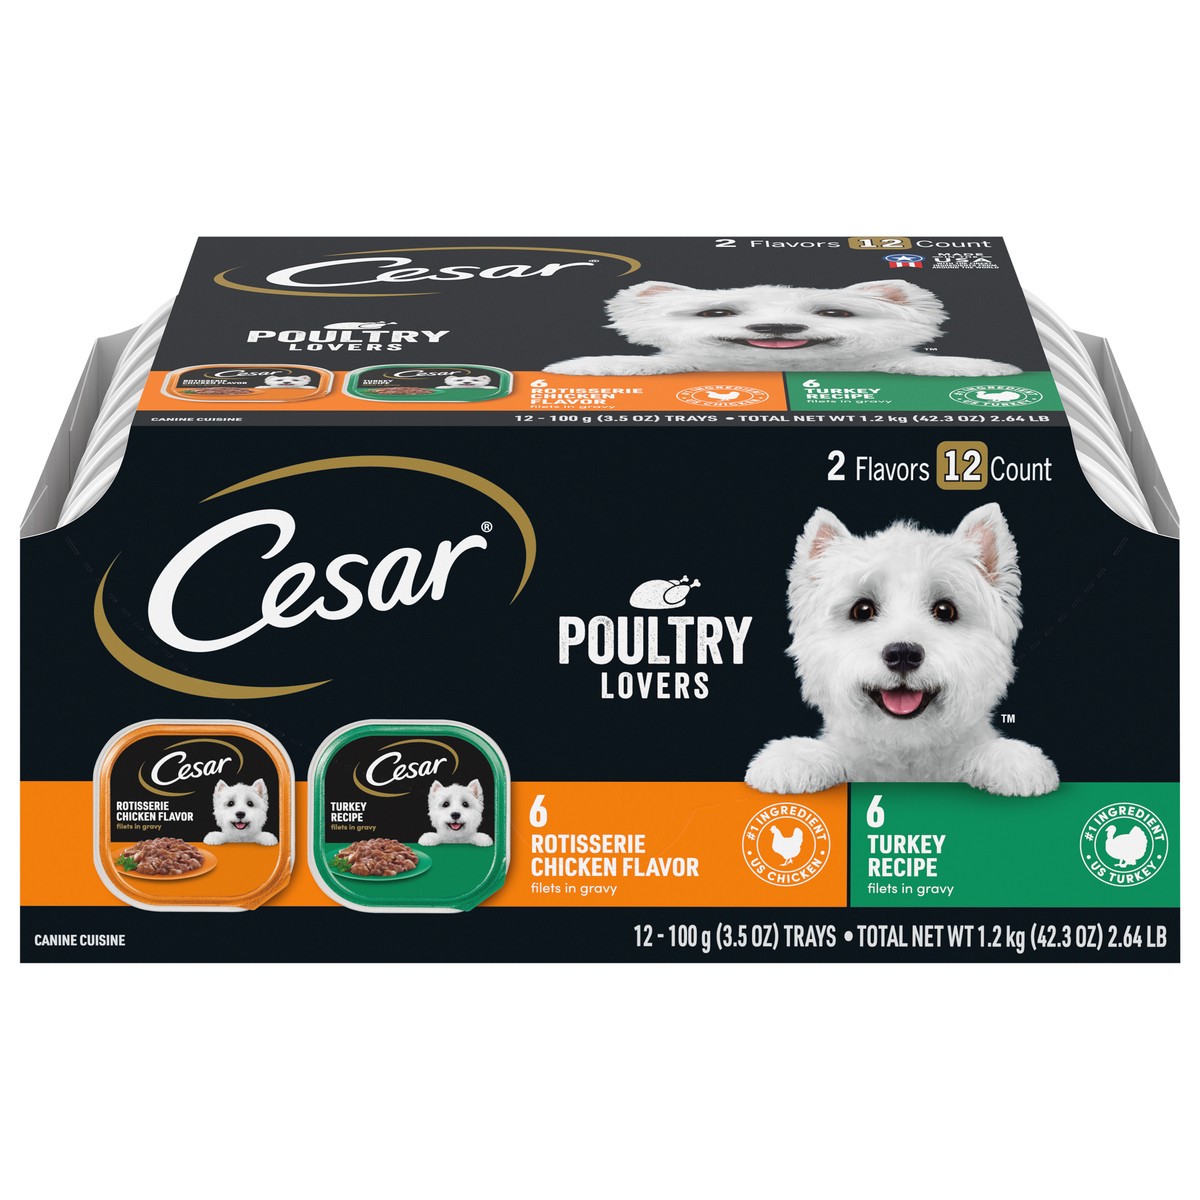 slide 4 of 15, Cesar Poultry Lovers Canine Cuisine 12 - 3.5 oz Trays, 12 ct